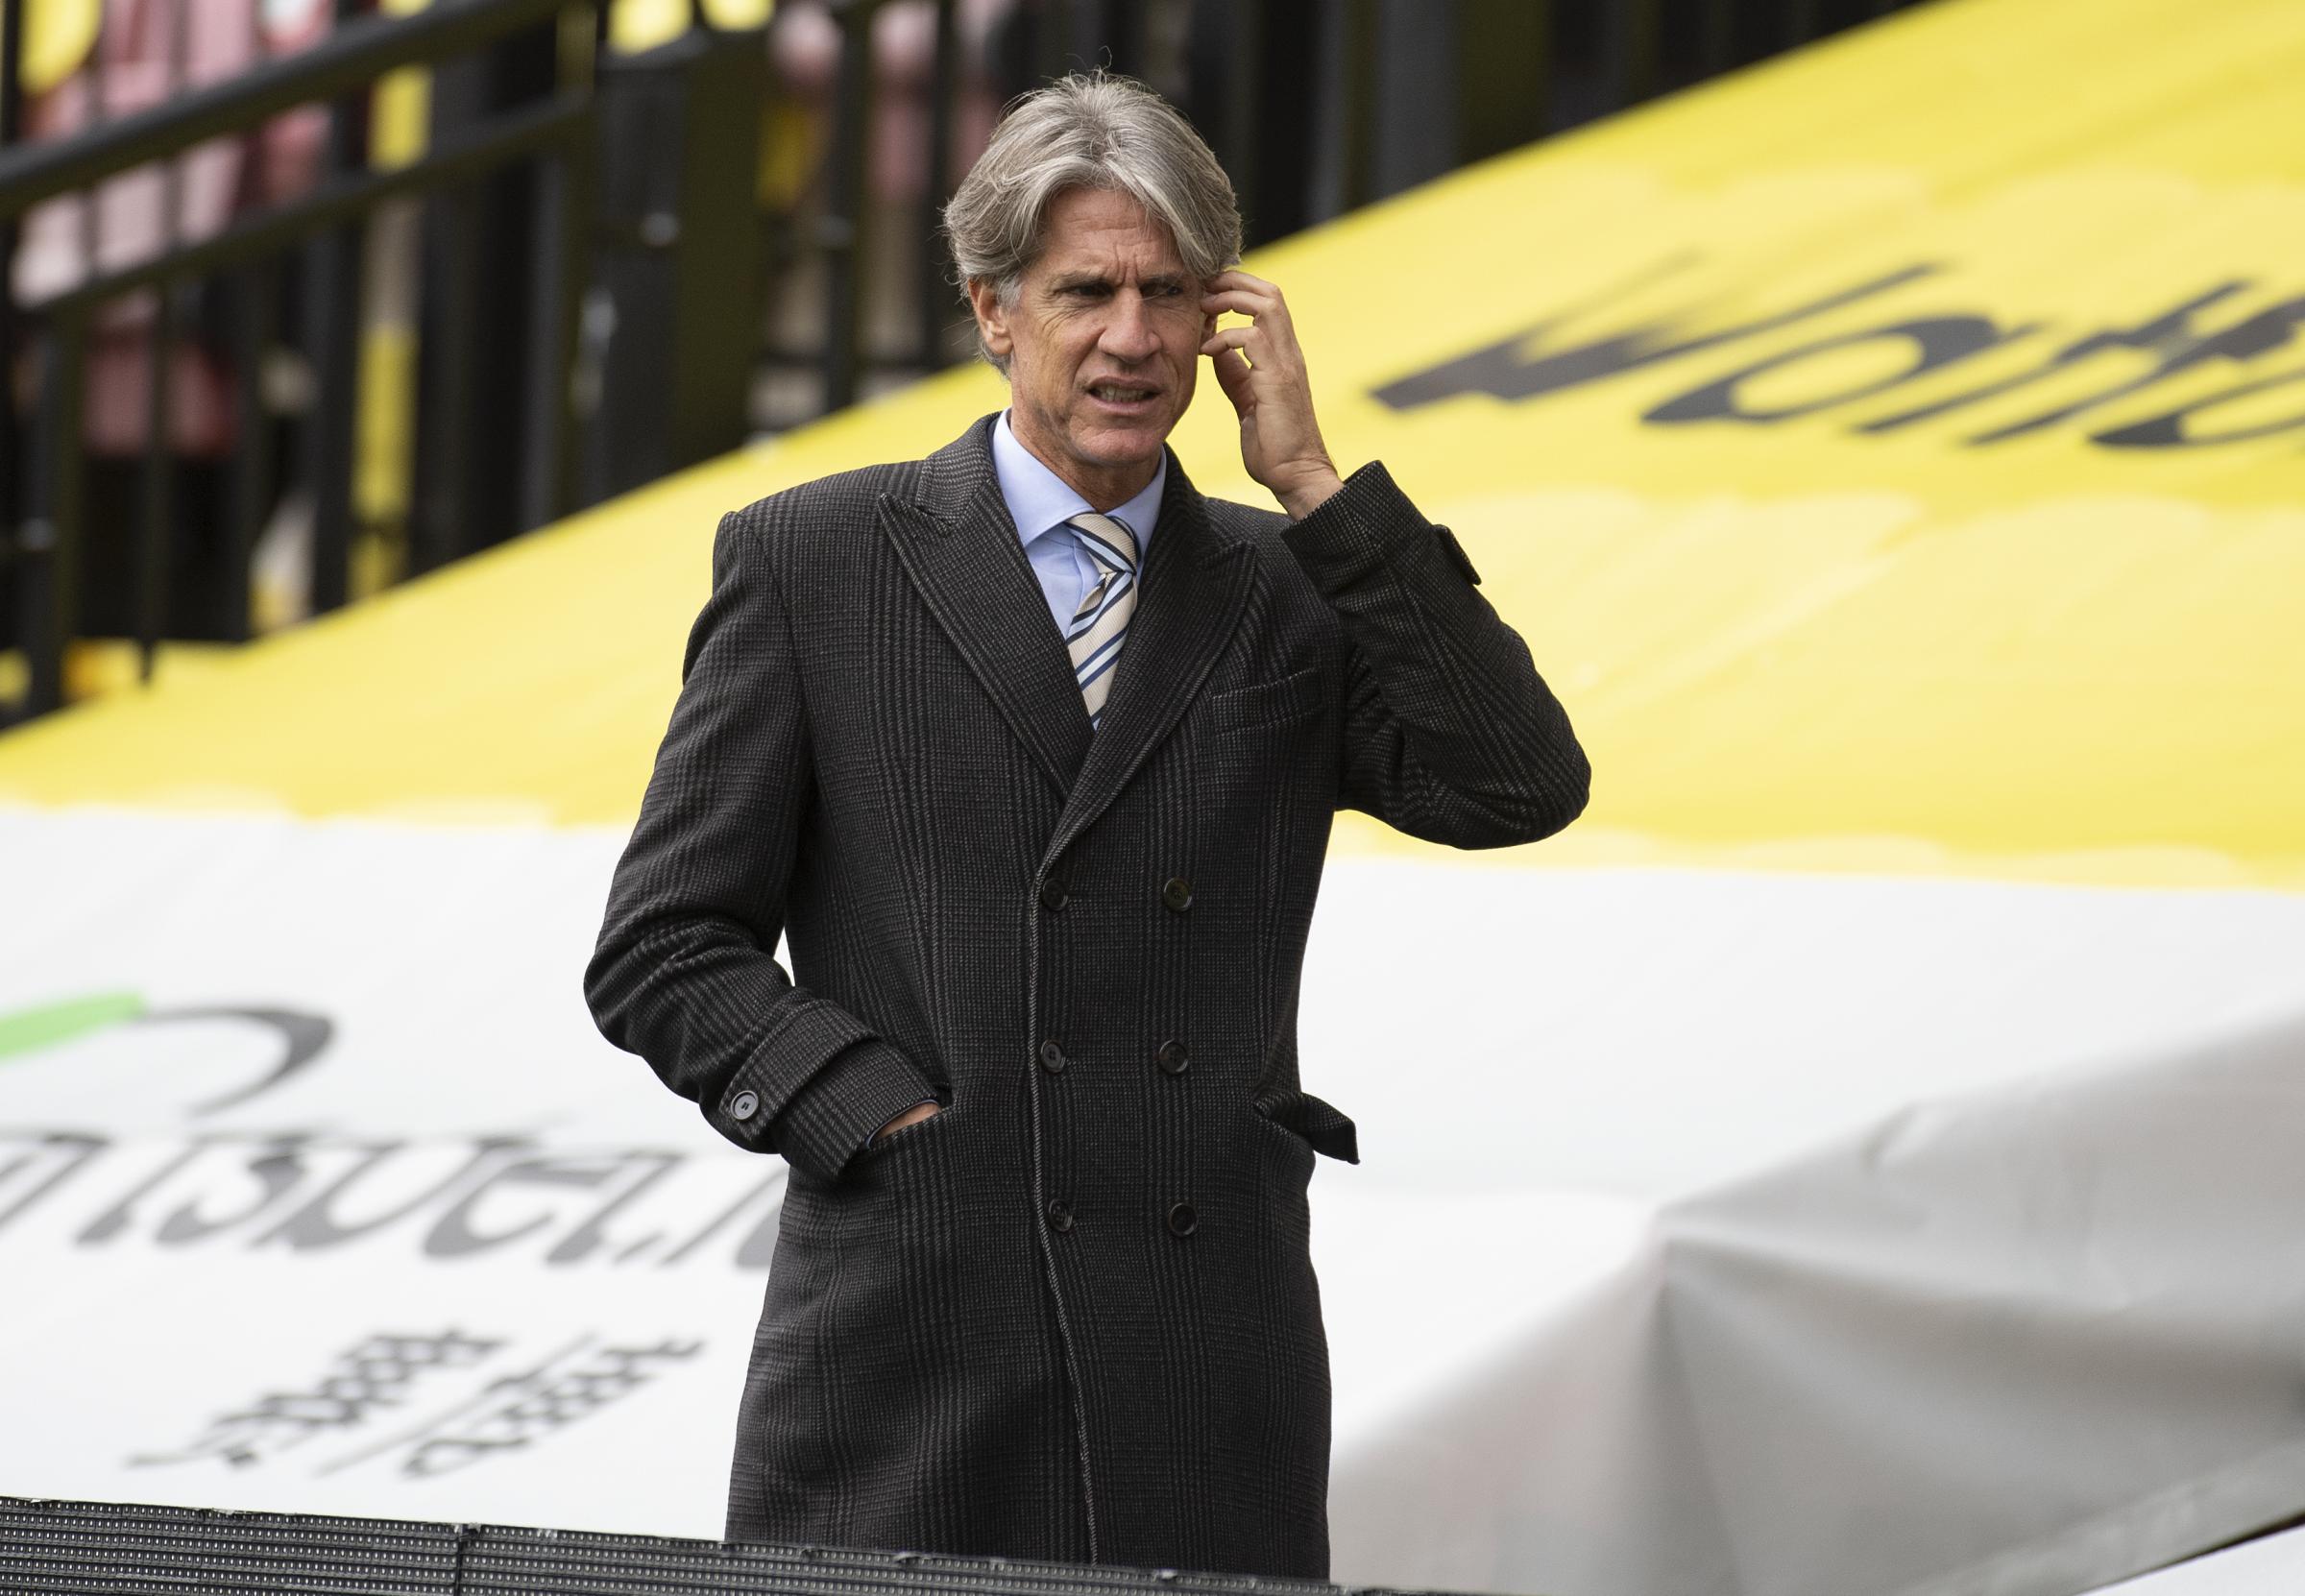 Sporting director gives update on Watford's transfer plans